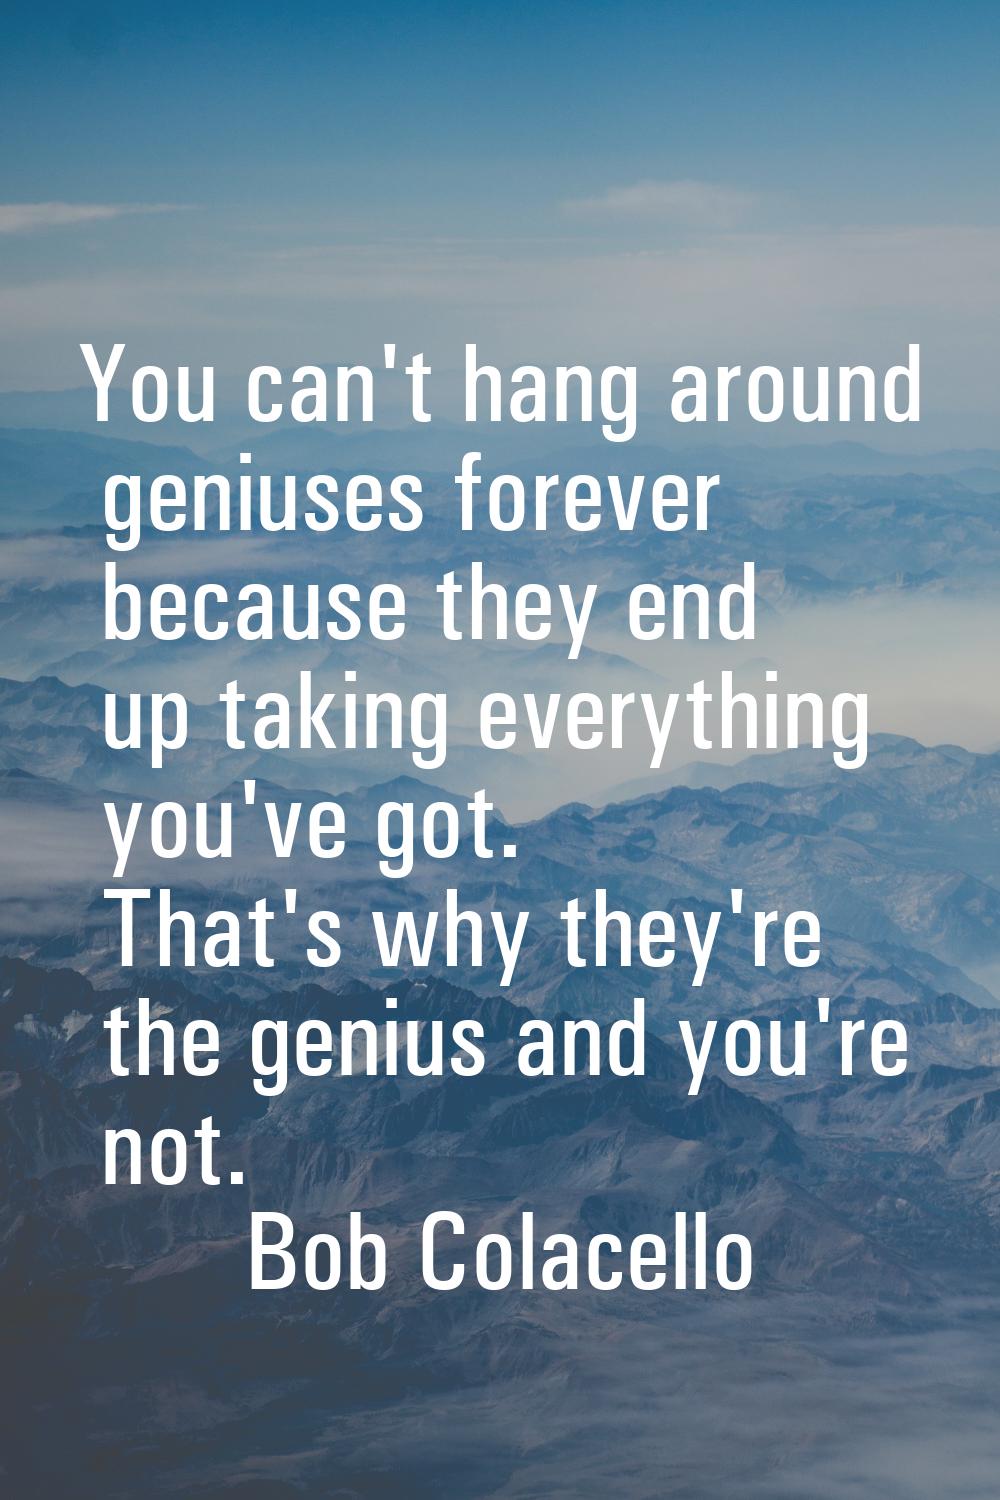 You can't hang around geniuses forever because they end up taking everything you've got. That's why